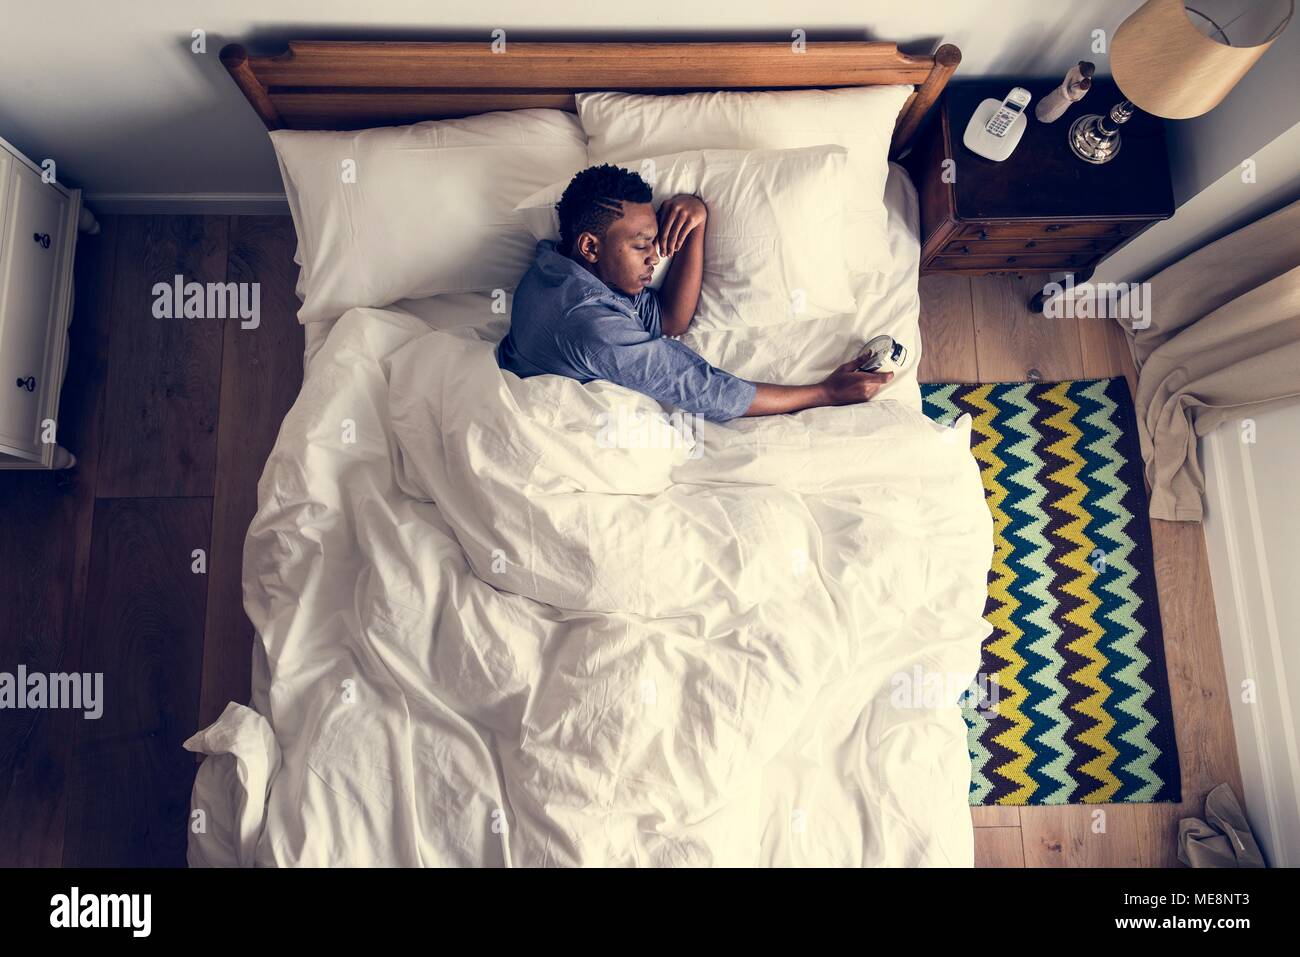 Man waking up in the morning by an alarm clock Stock Photo